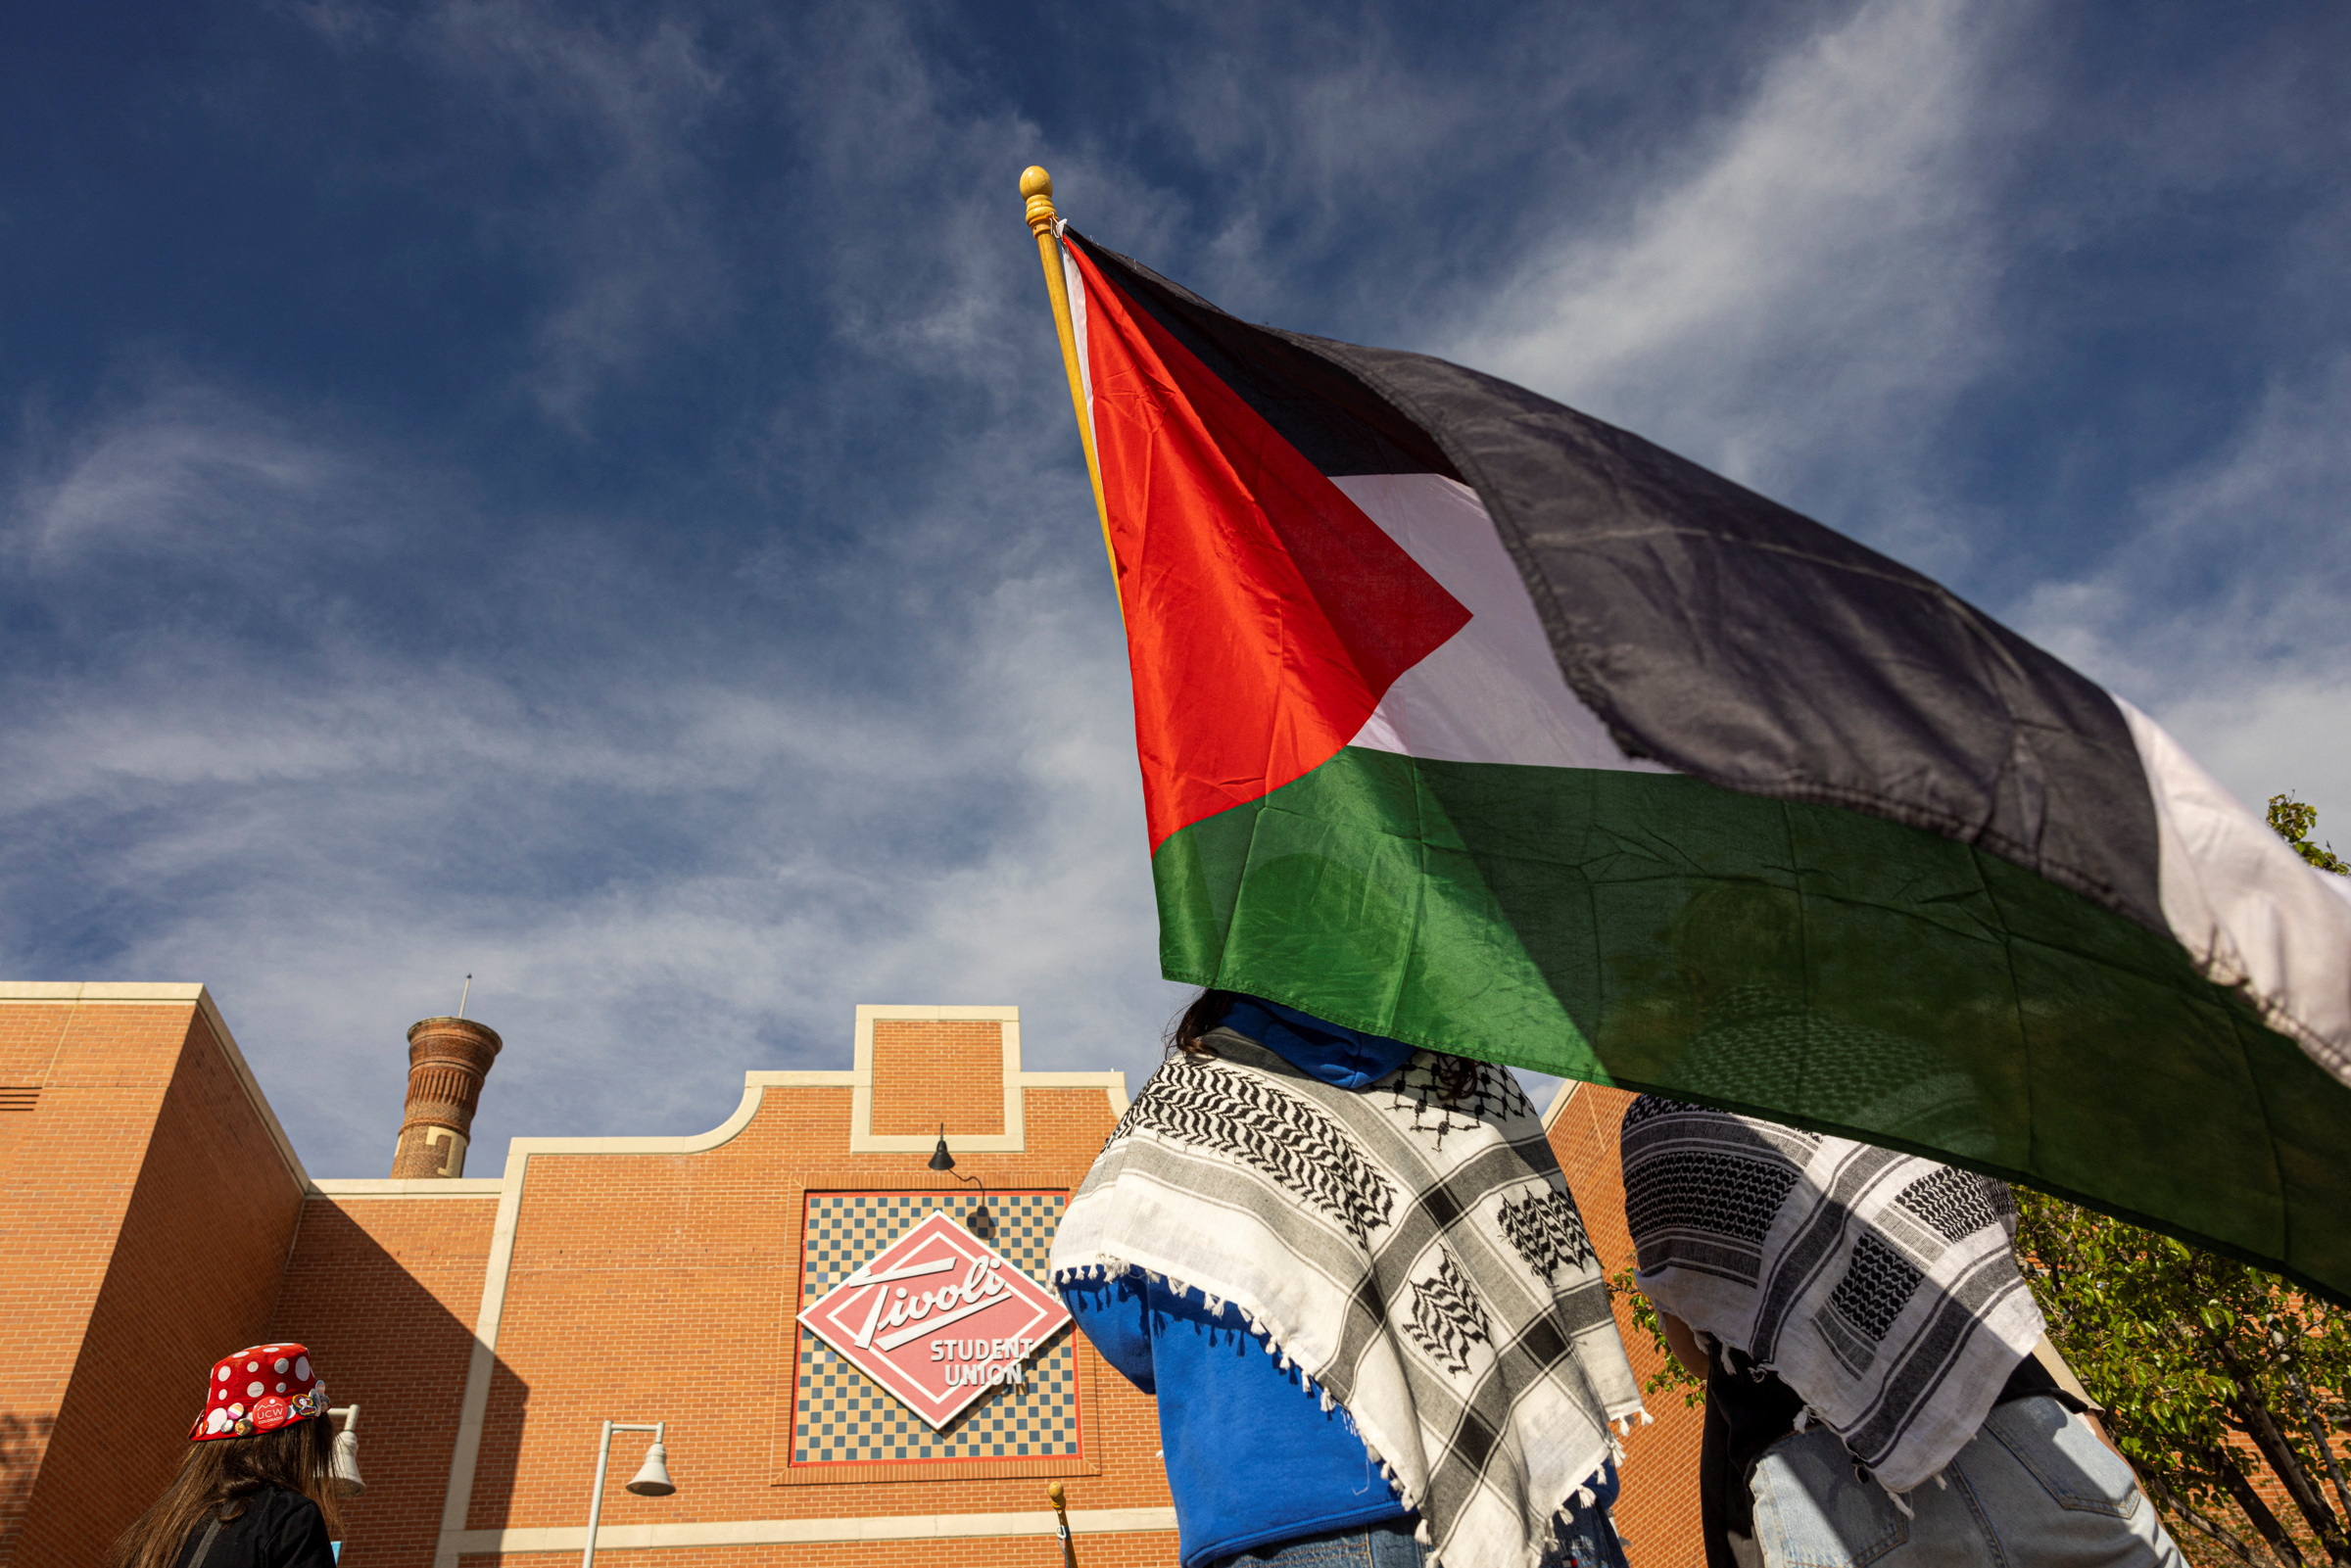 Pro-Palestinian protesters gather at an encampment in Denver